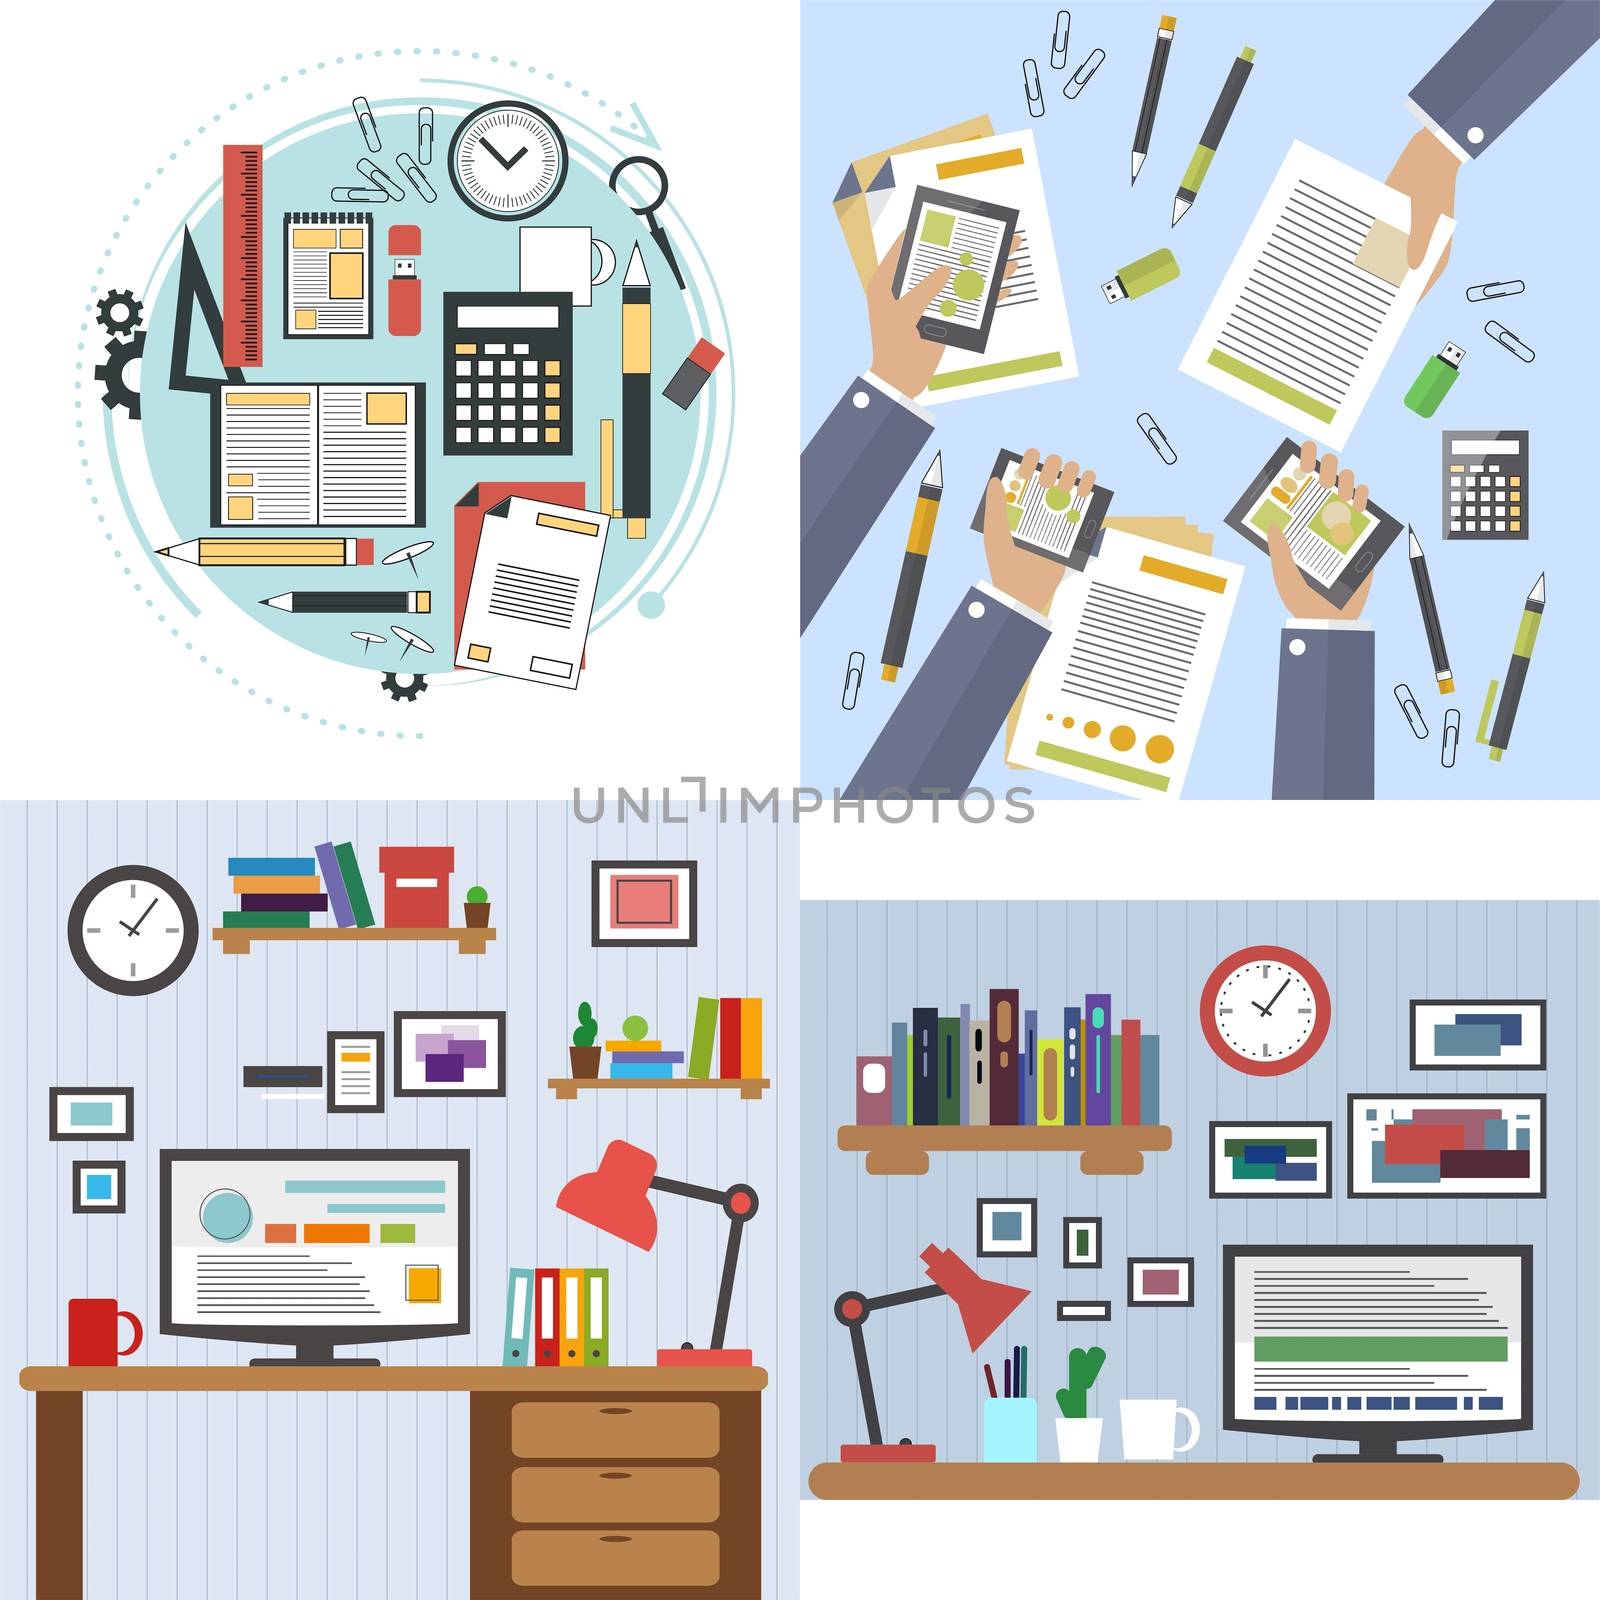 Flat design of modern office interior with designer desktop showing application interface icons and elements in minimalist style color. by Adamchuk